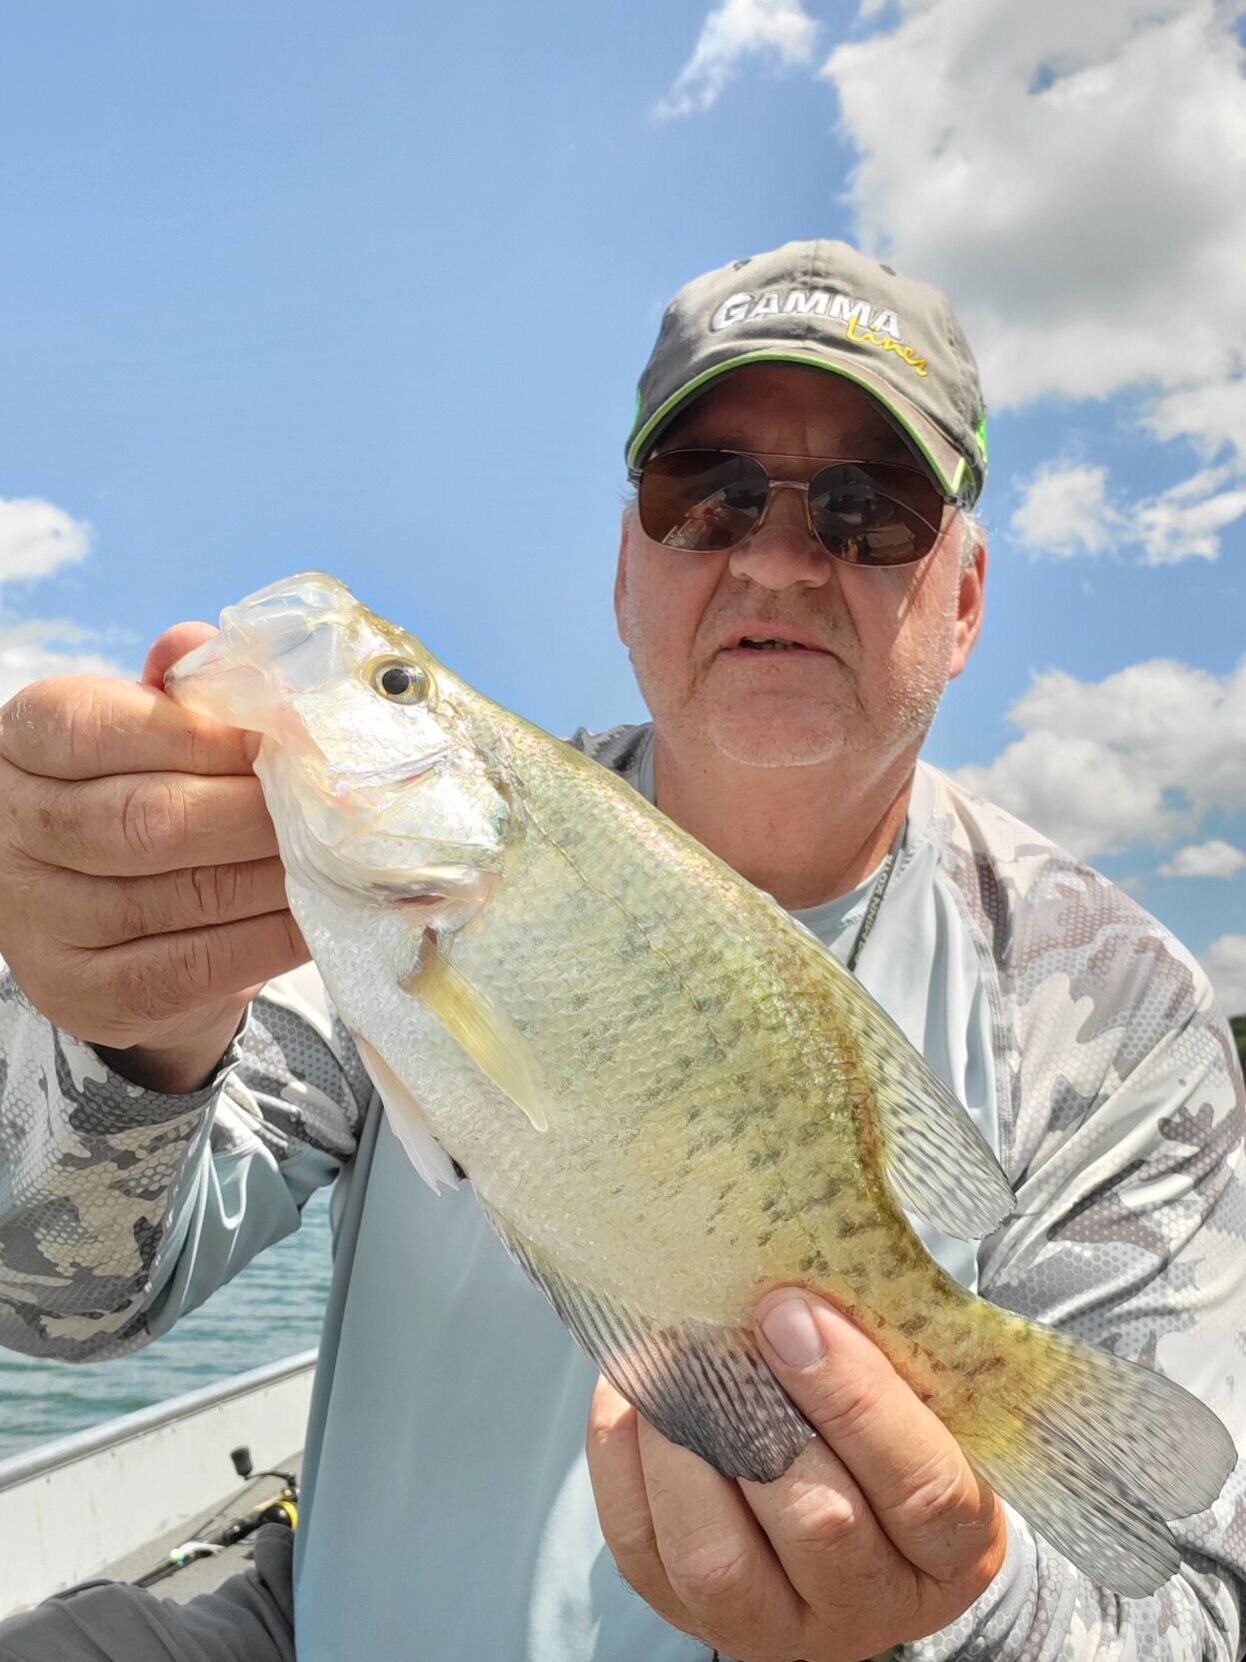 With fall arriving, head west for good fishing | Indiana County